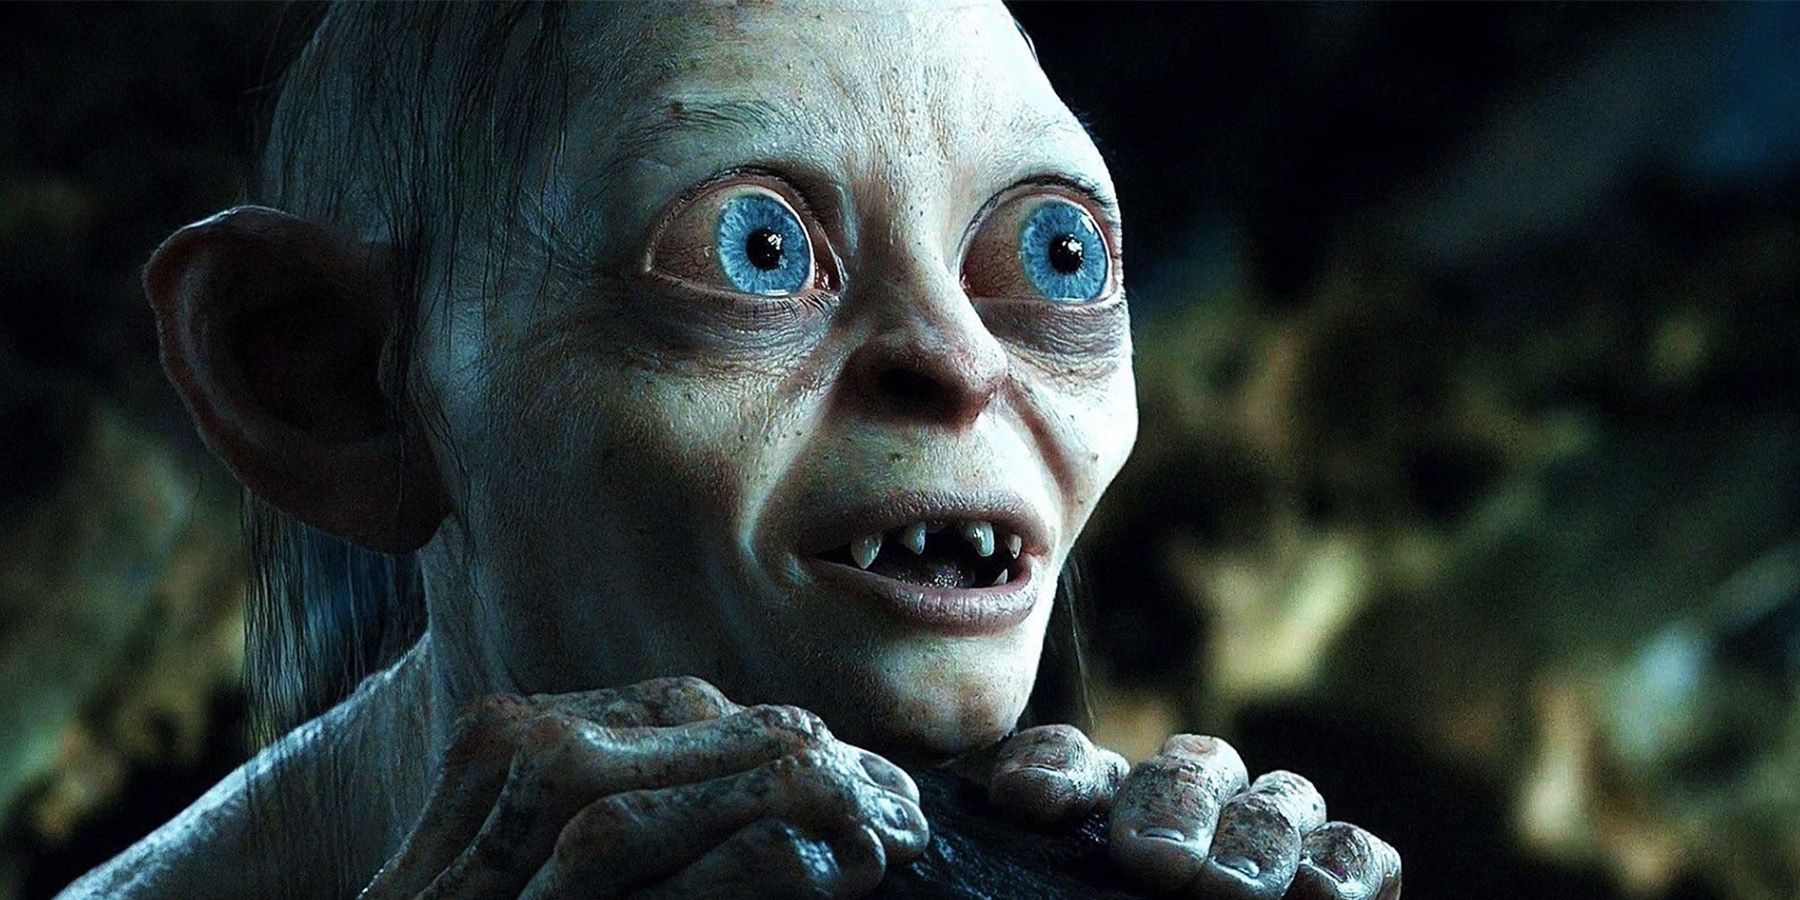 gollum-lord-of-the-rings-1